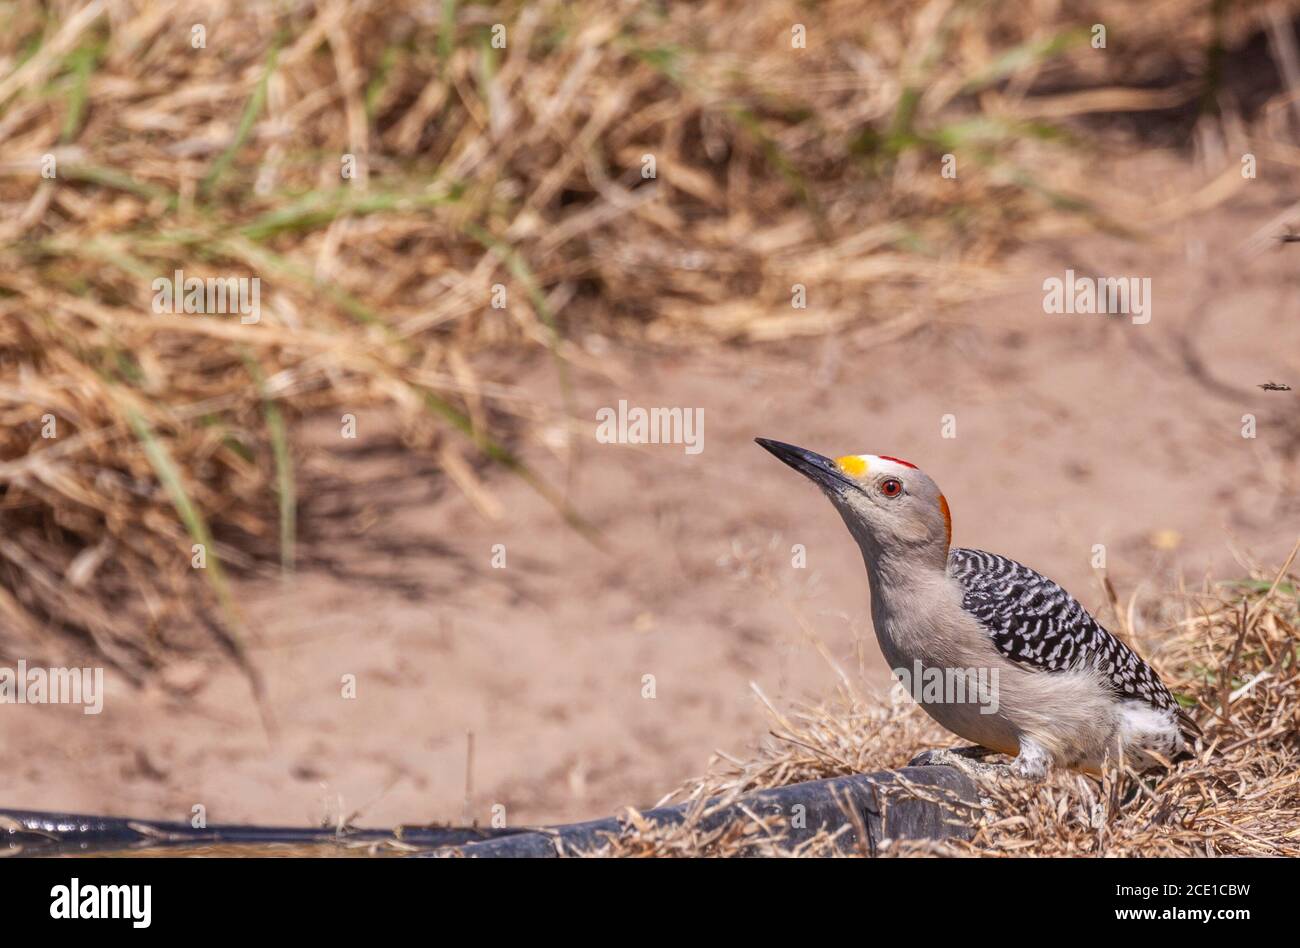 Male Golden-fronted Woodpecker, Melanerpes aurifrons, at the Javelina-Martin ranch and refuge near McAllen, Texas, in the Rio Grande Valley. Stock Photo